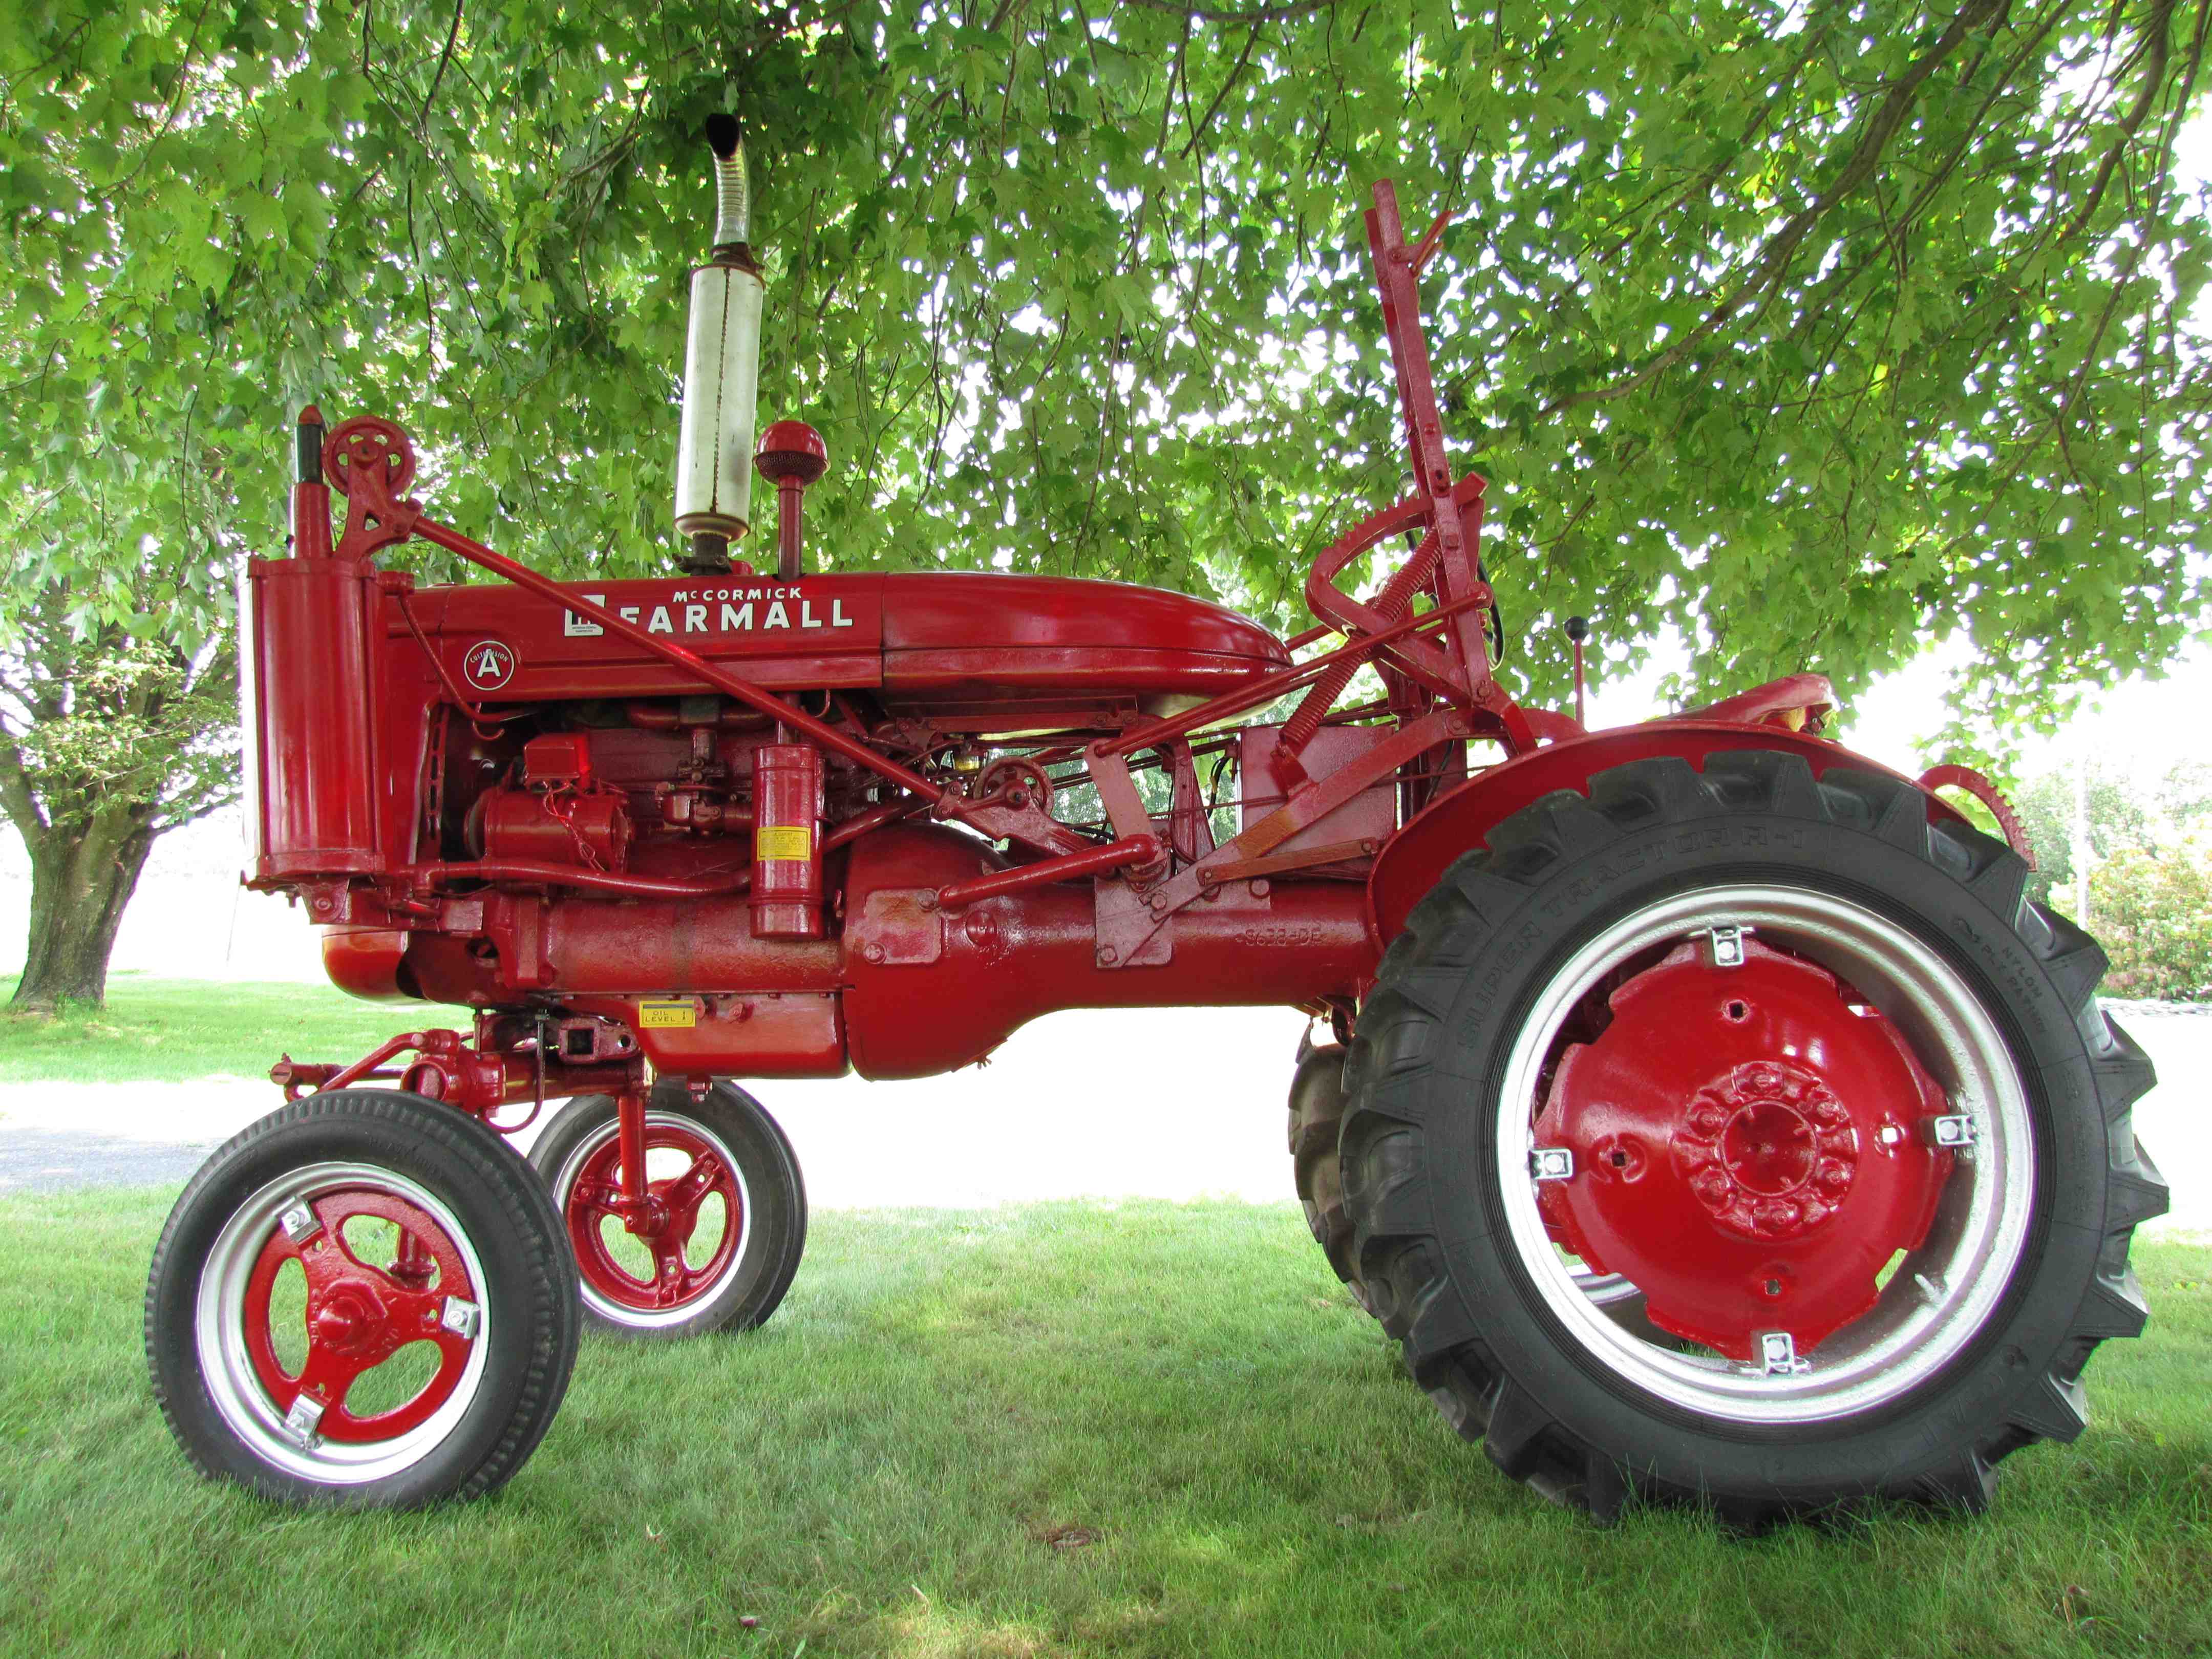 The Farmall Pneumatic Lift All. Old Paths Equipment